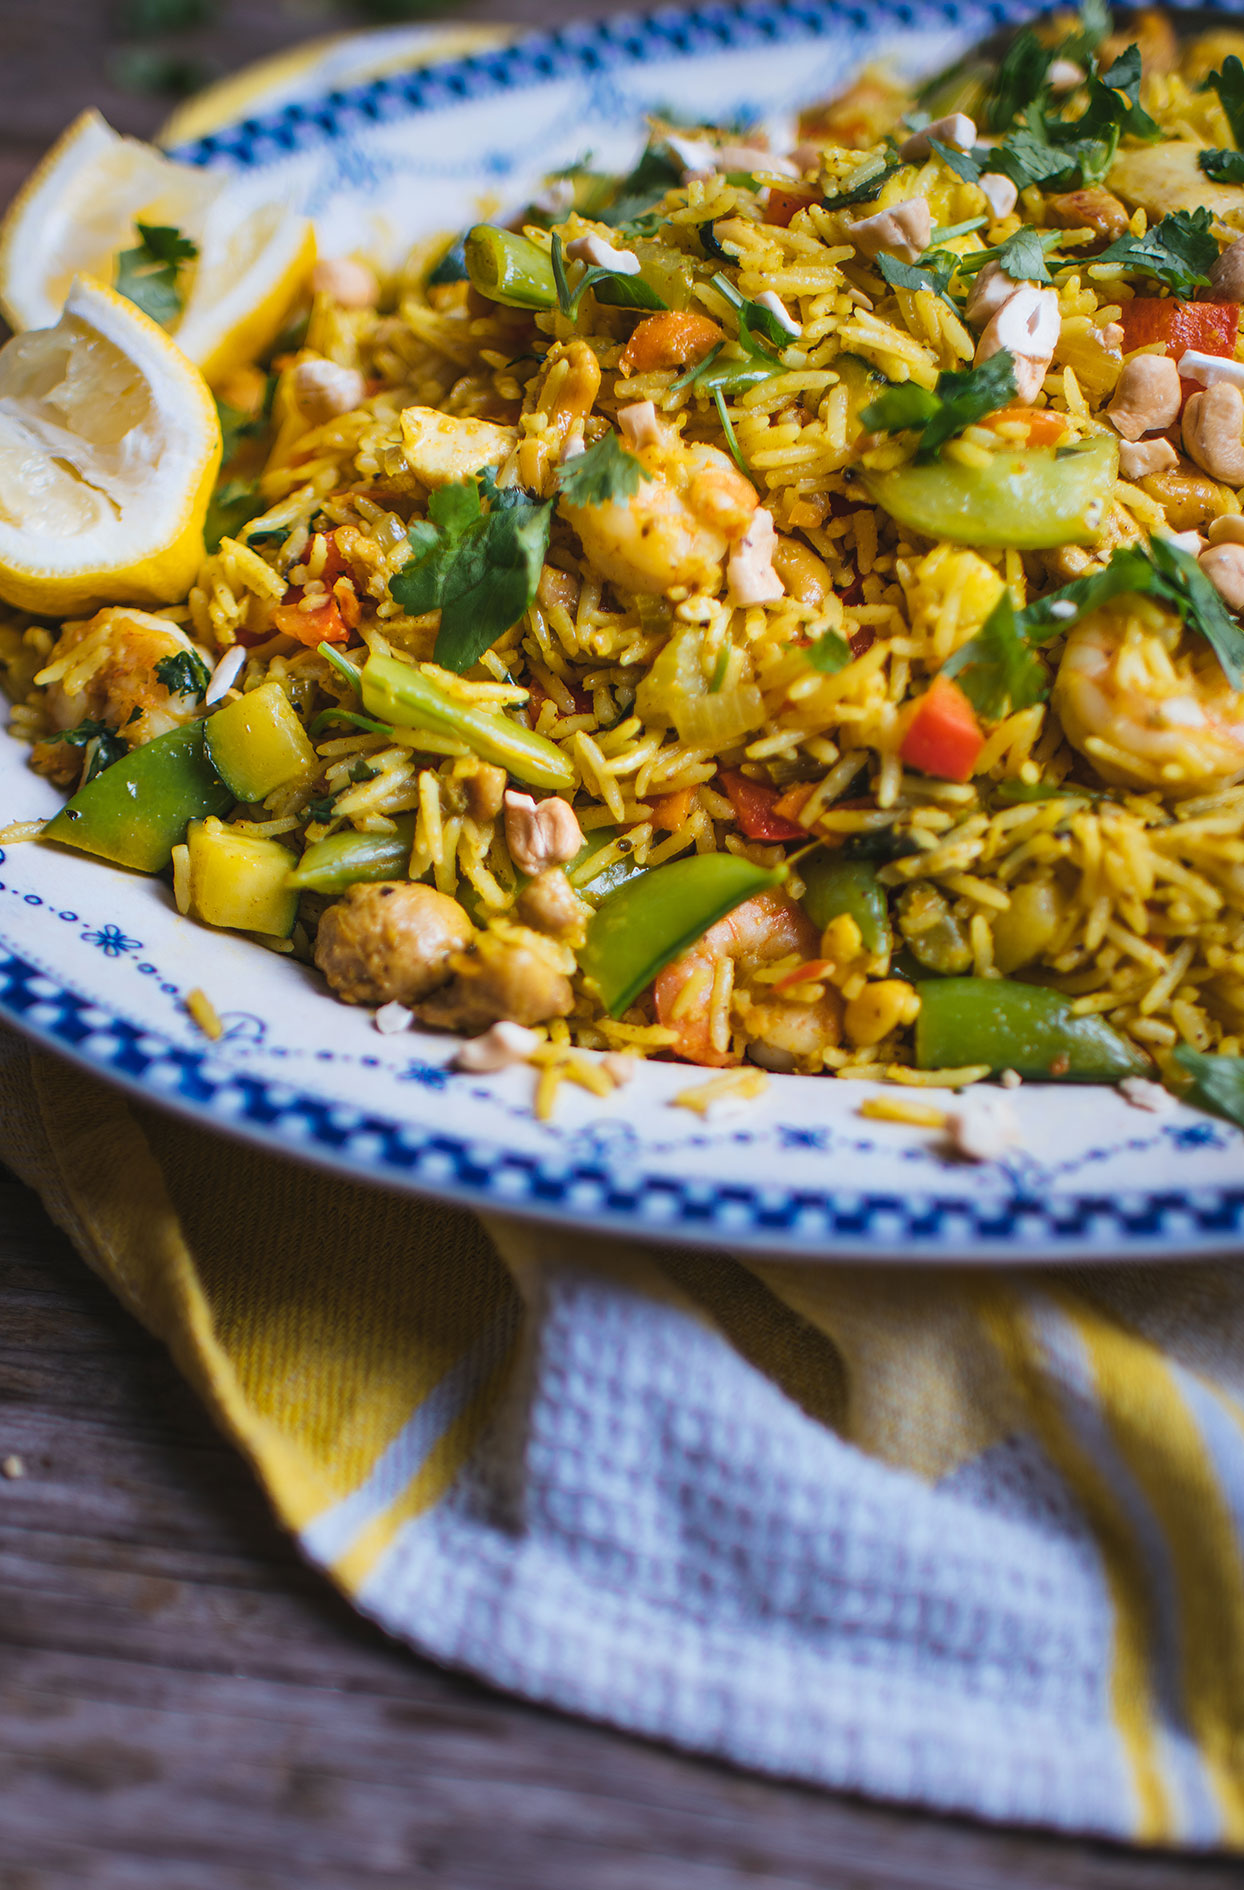 Curry rice with chicken, shrimp and vegetables